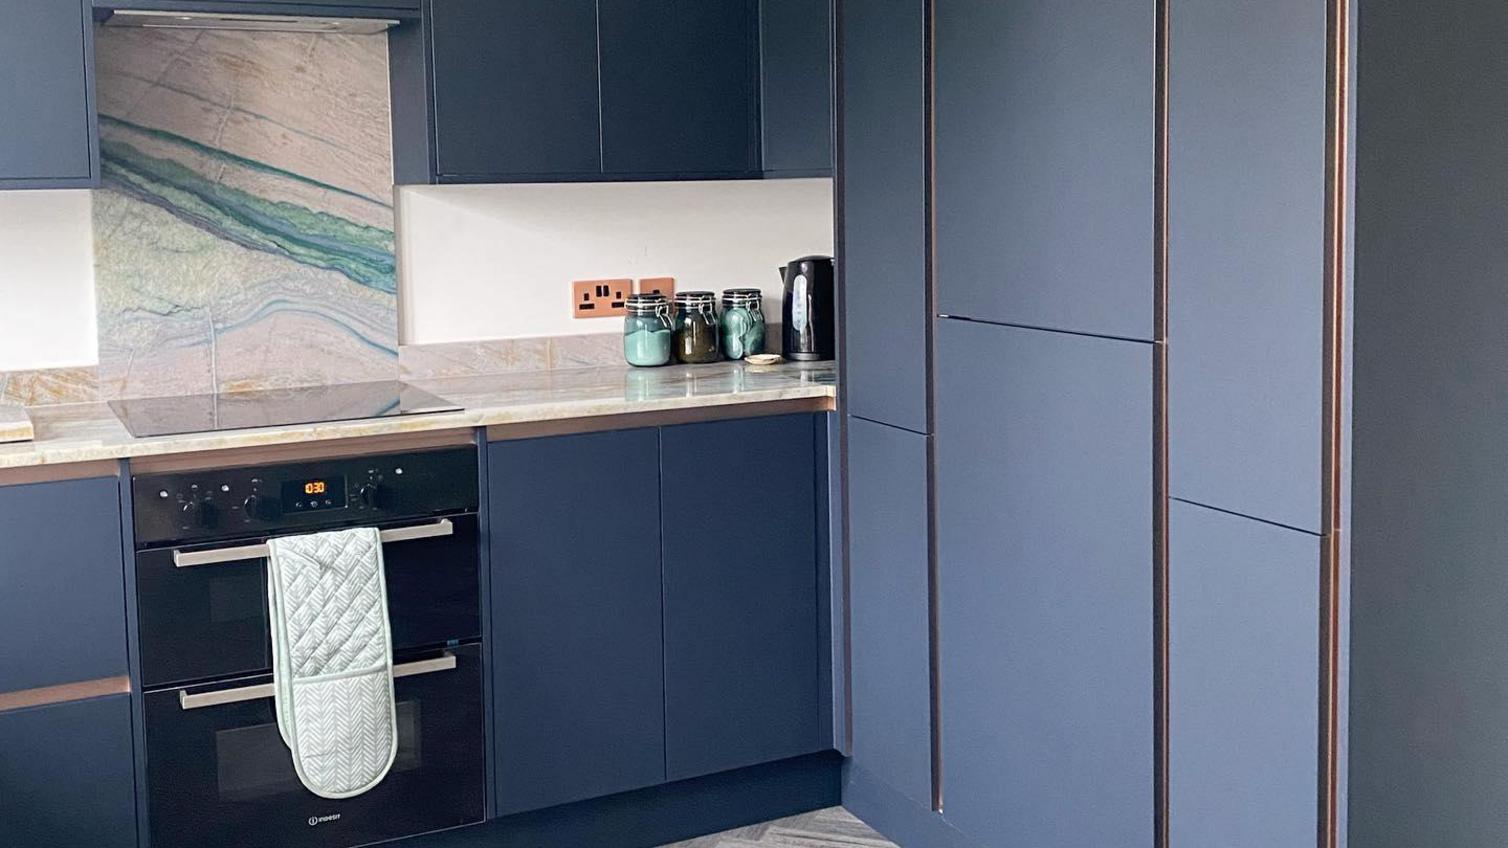 Navy integrated handle kitchen with a marble backsplash with blue veining, an integrated oven and tower units.